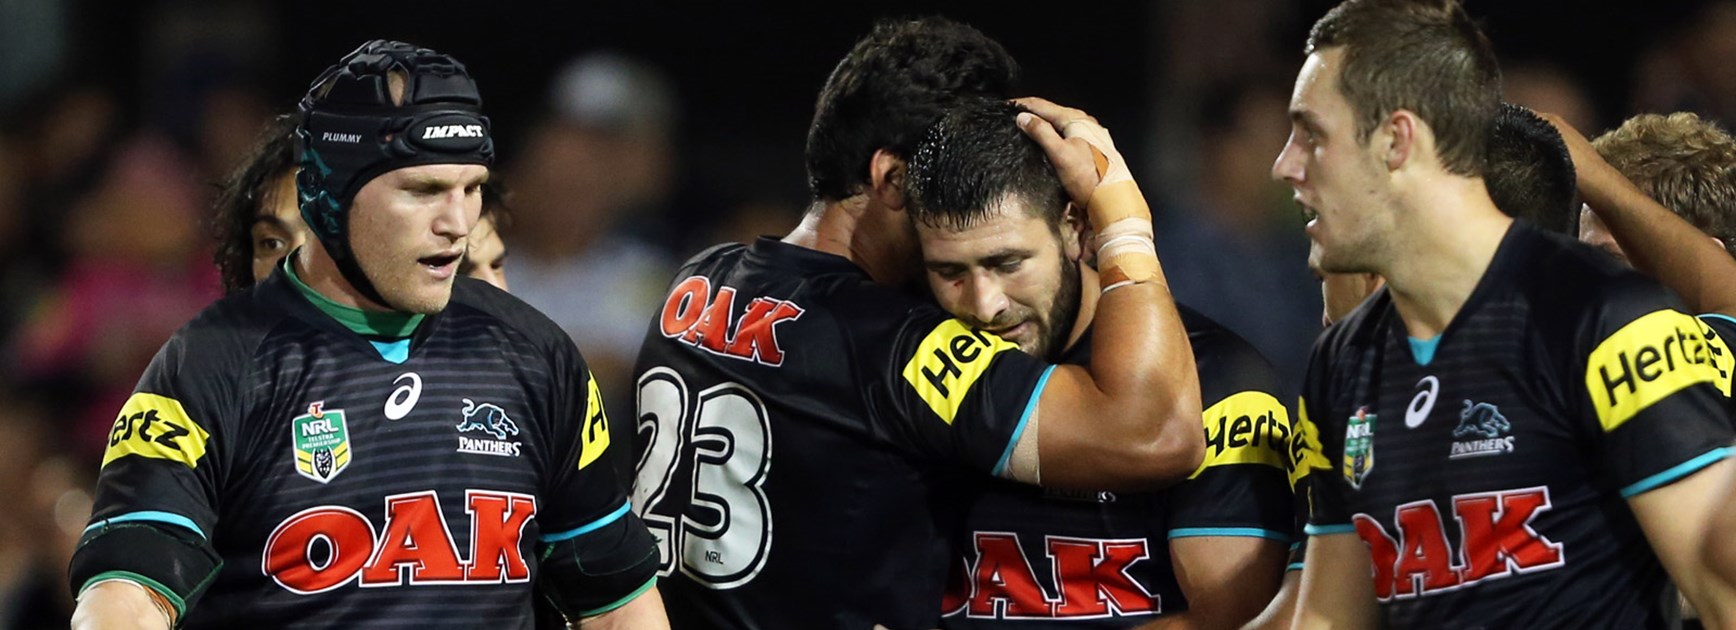 With a massive injury toll, the Panthers narrowly avoided the wooden spoon in 2015.